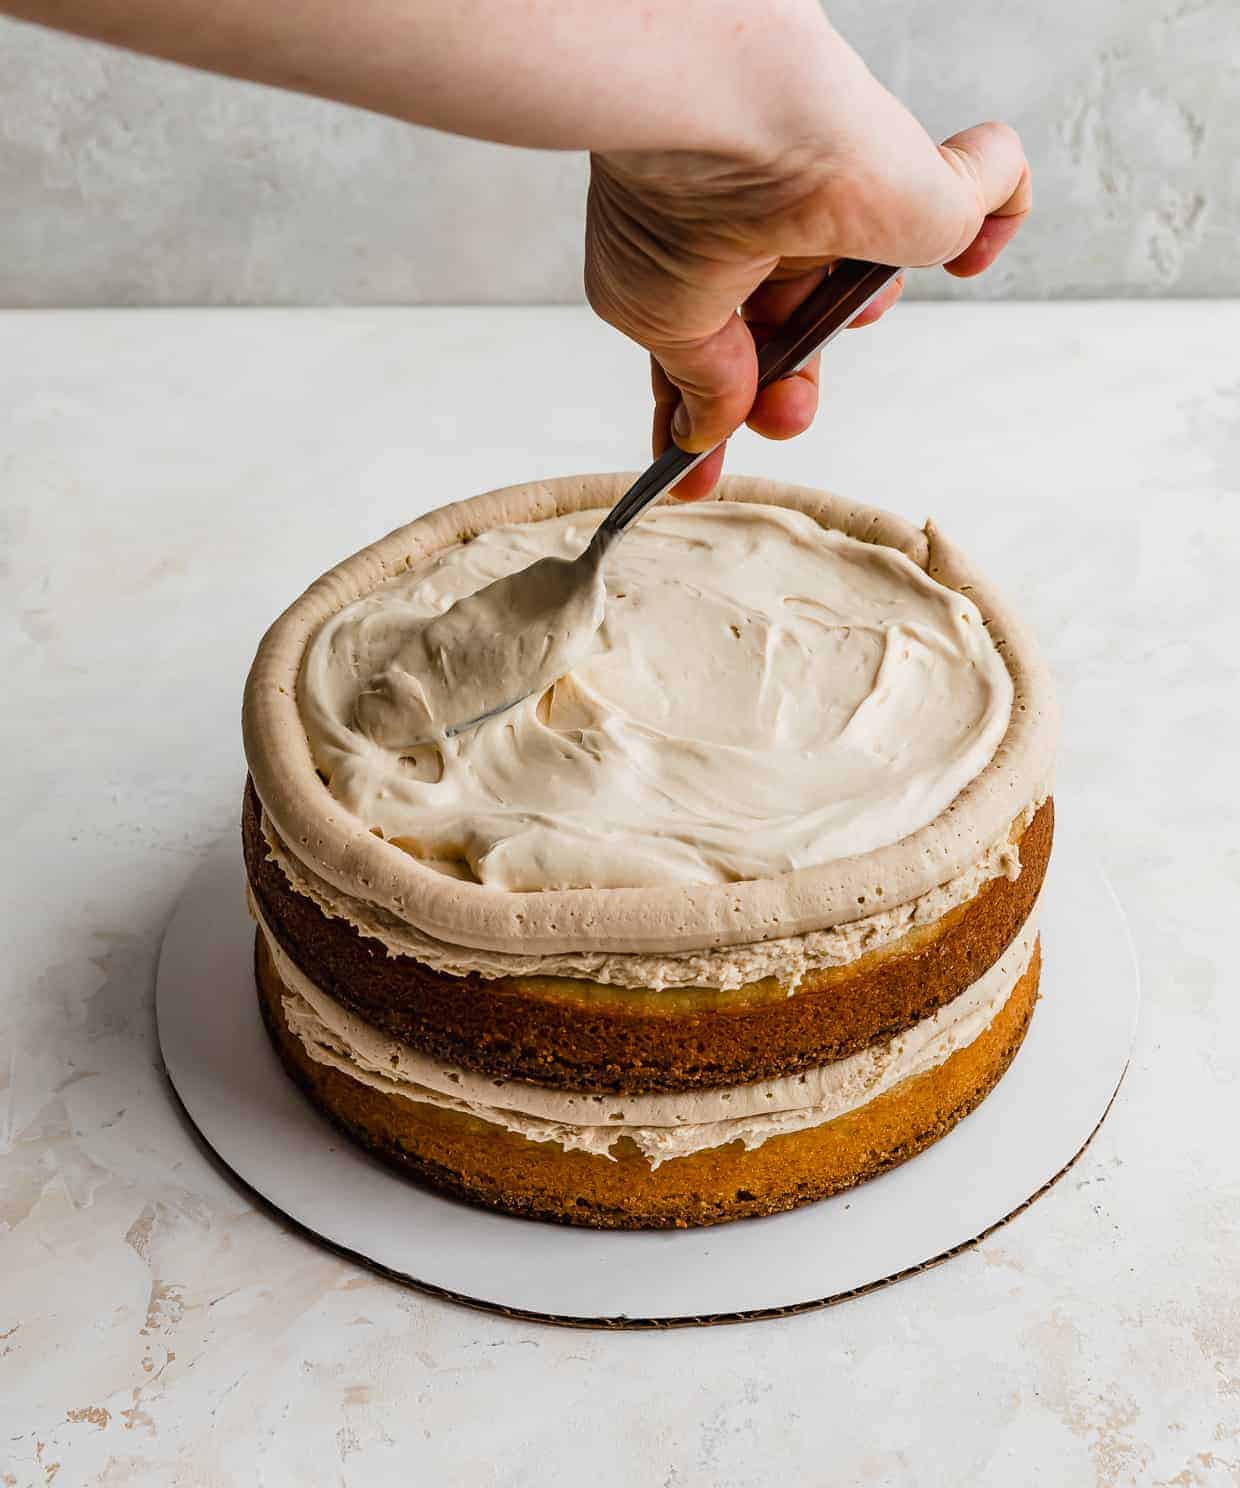 A spoon spreading a tan colored caramel filling on top of a cheesecake cake layer.